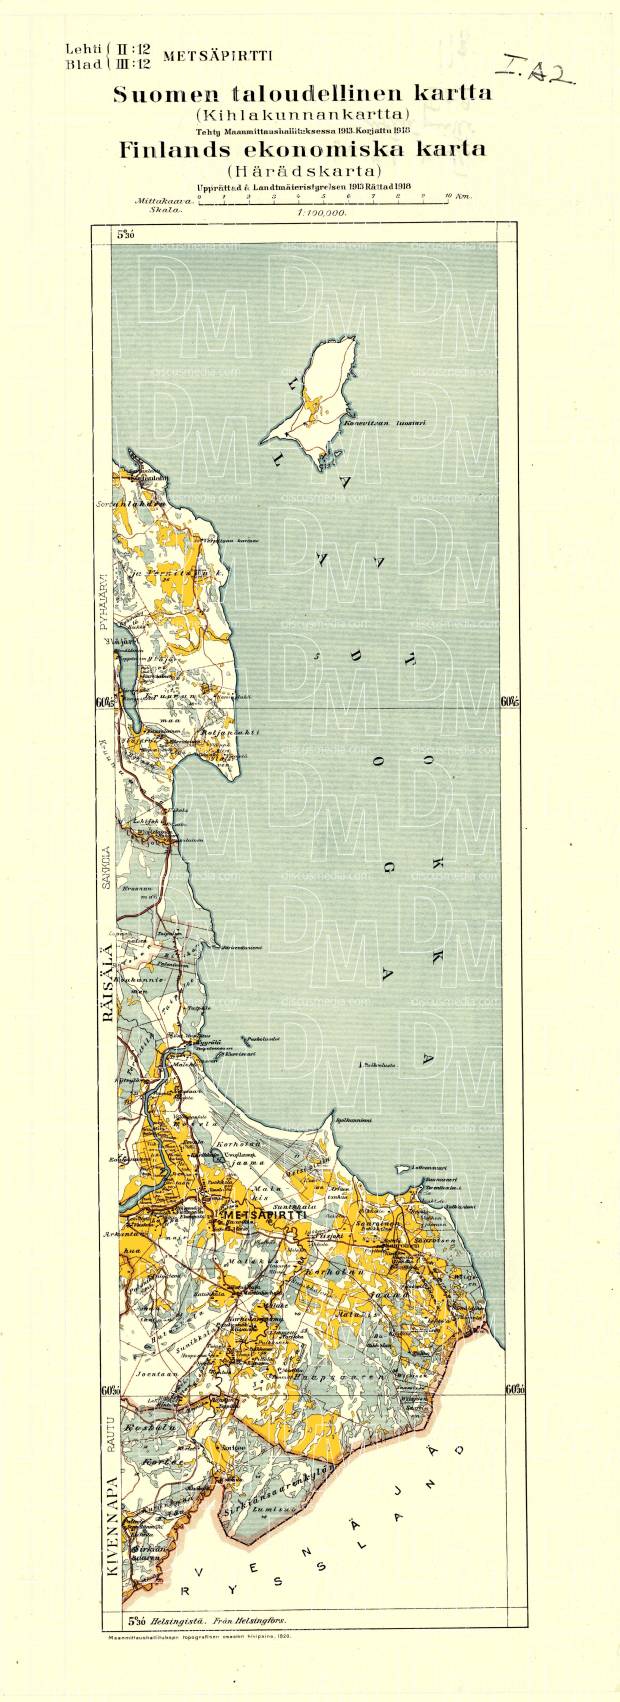 Zaporožskoje. Metsäpirtti. Taloudellinen kartta. Economic map from 1920. Use the zooming tool to explore in higher level of detail. Obtain as a quality print or high resolution image